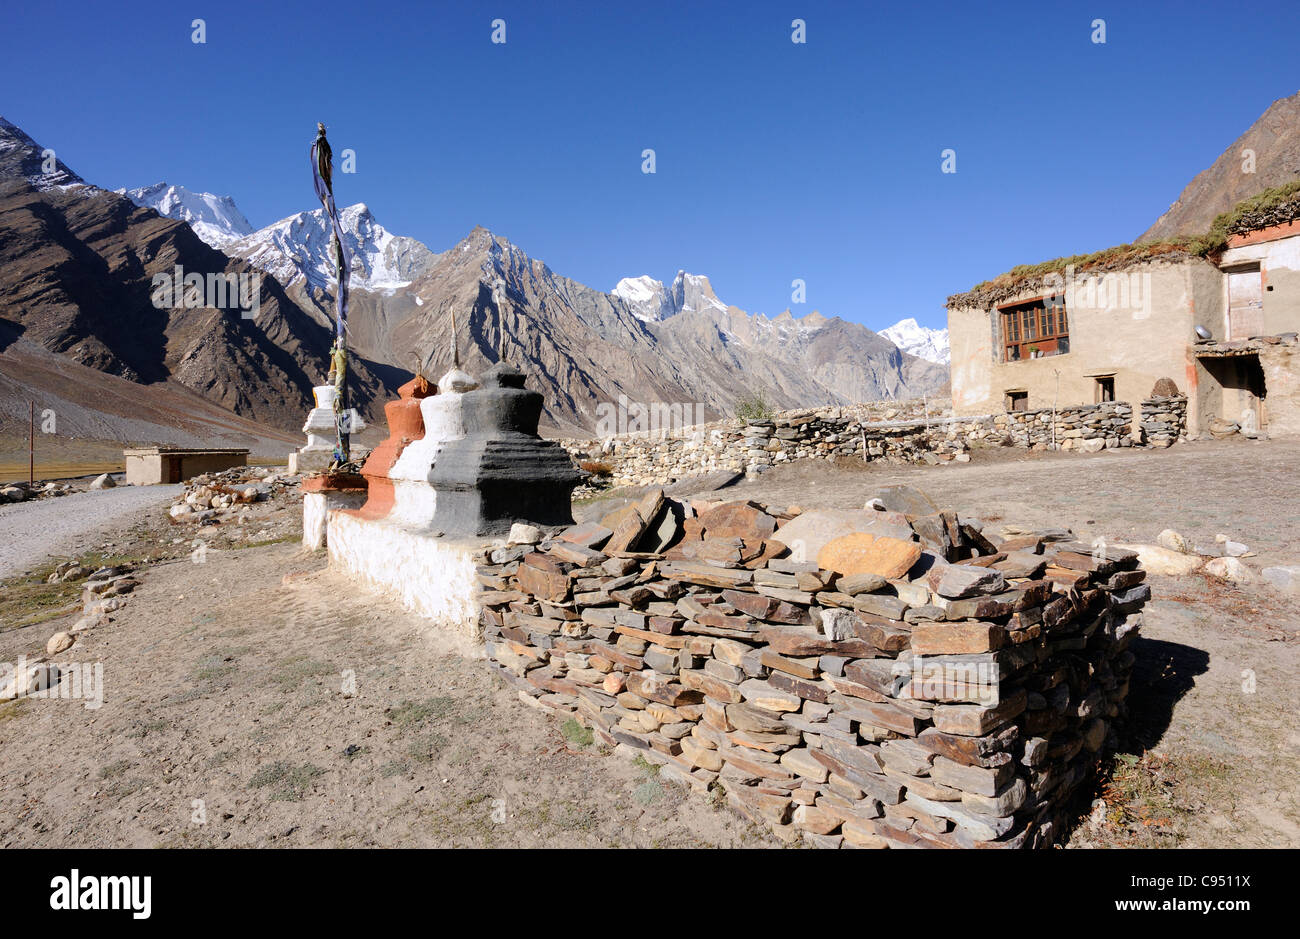 A traditional flat-roofed house and coloured stupas, chortens, on  the road from Kargil into the Zanscar valley. Stock Photo